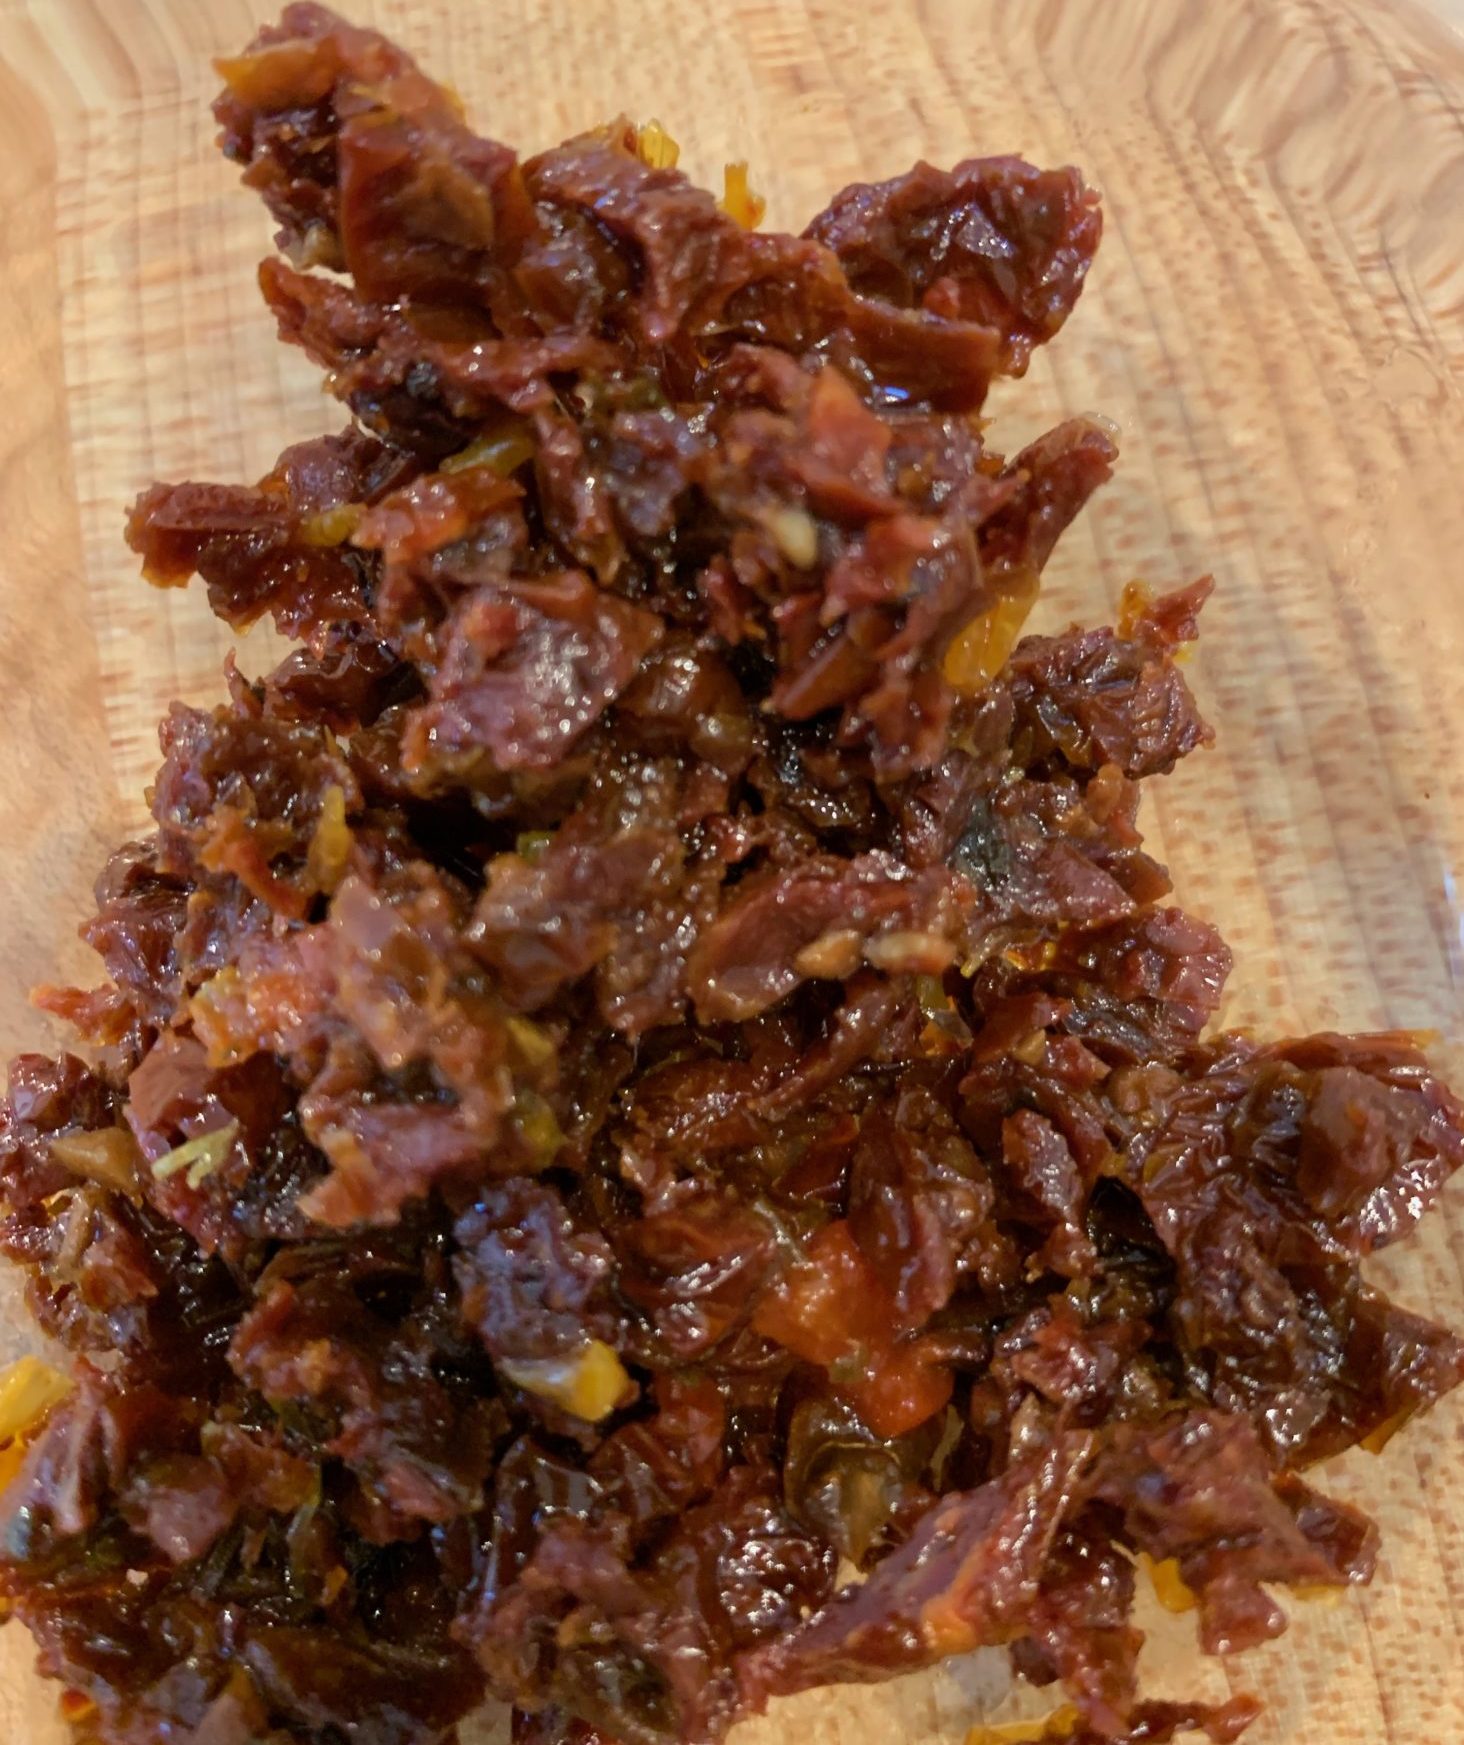 Chopped dried tomatoes